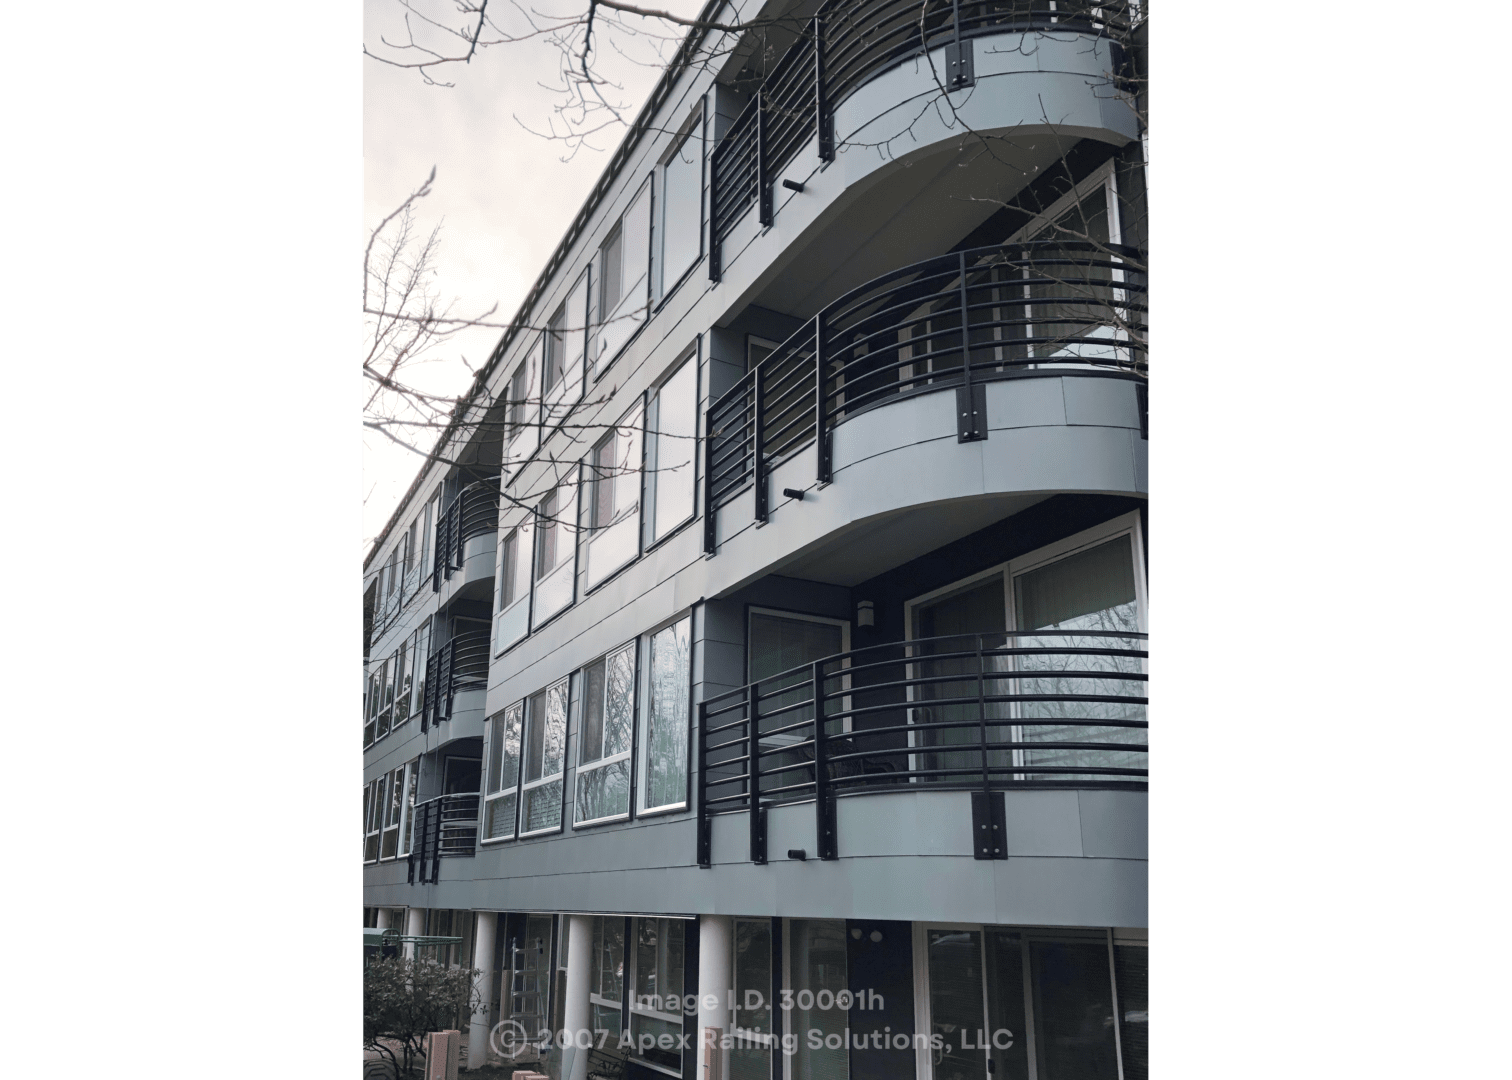 A building with safe balcony spaces